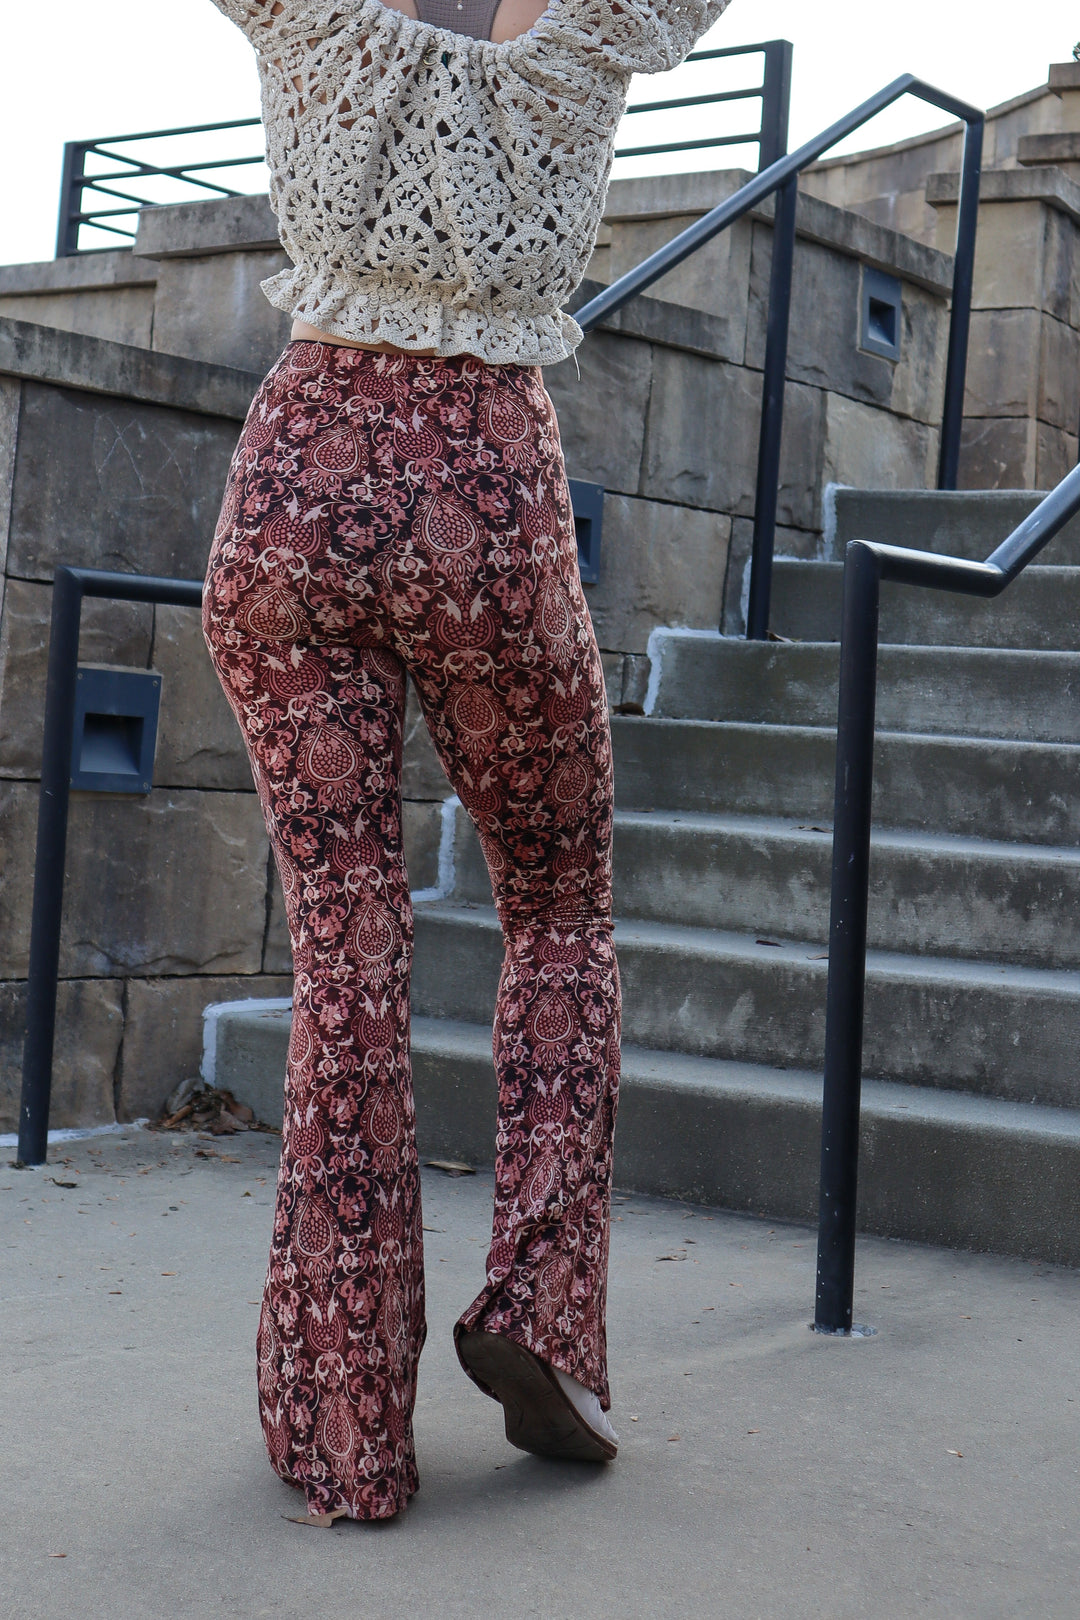 SALE Alchemy Print Pull On Hippie Flare Pants Leggings Layering Comfy